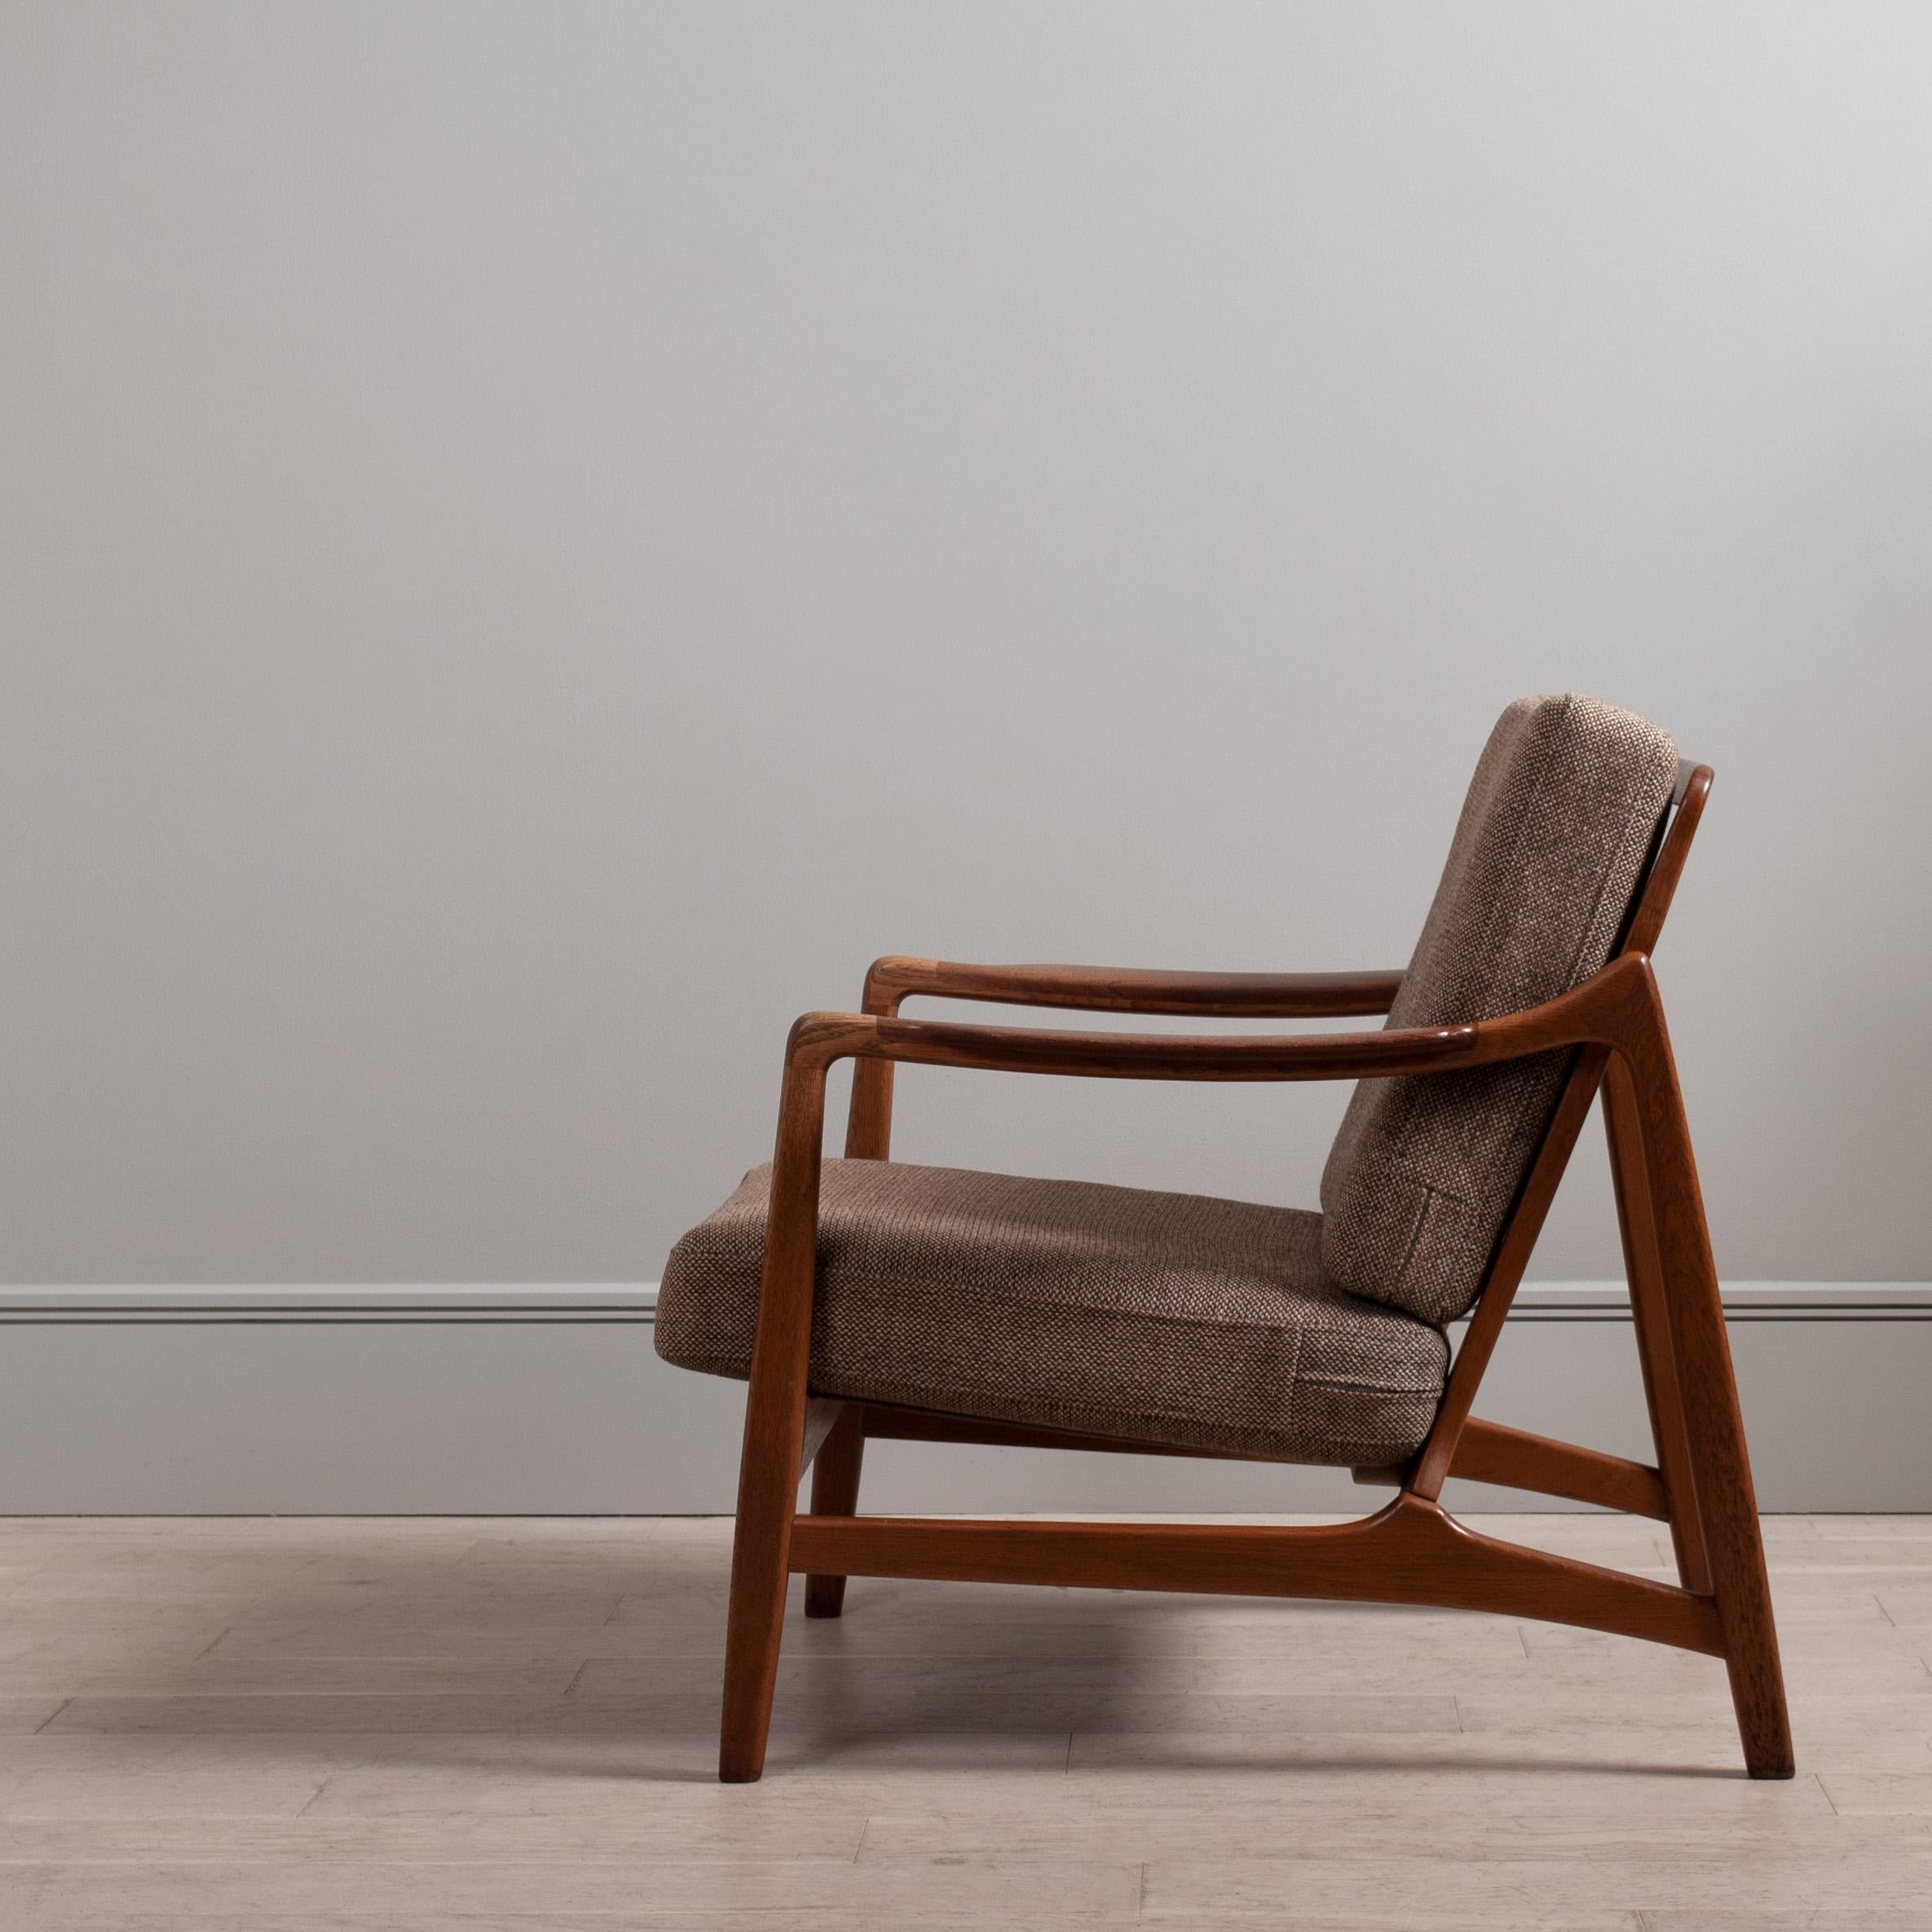 A superbly designed lounge chair by Tove & Edvard Kindt Larsen. Model 117 constructed from European oak with inset teak armrests. Price includes reupholstery in fabric colour of choice from the Isle Mill Fabric - Leather upholstery for small